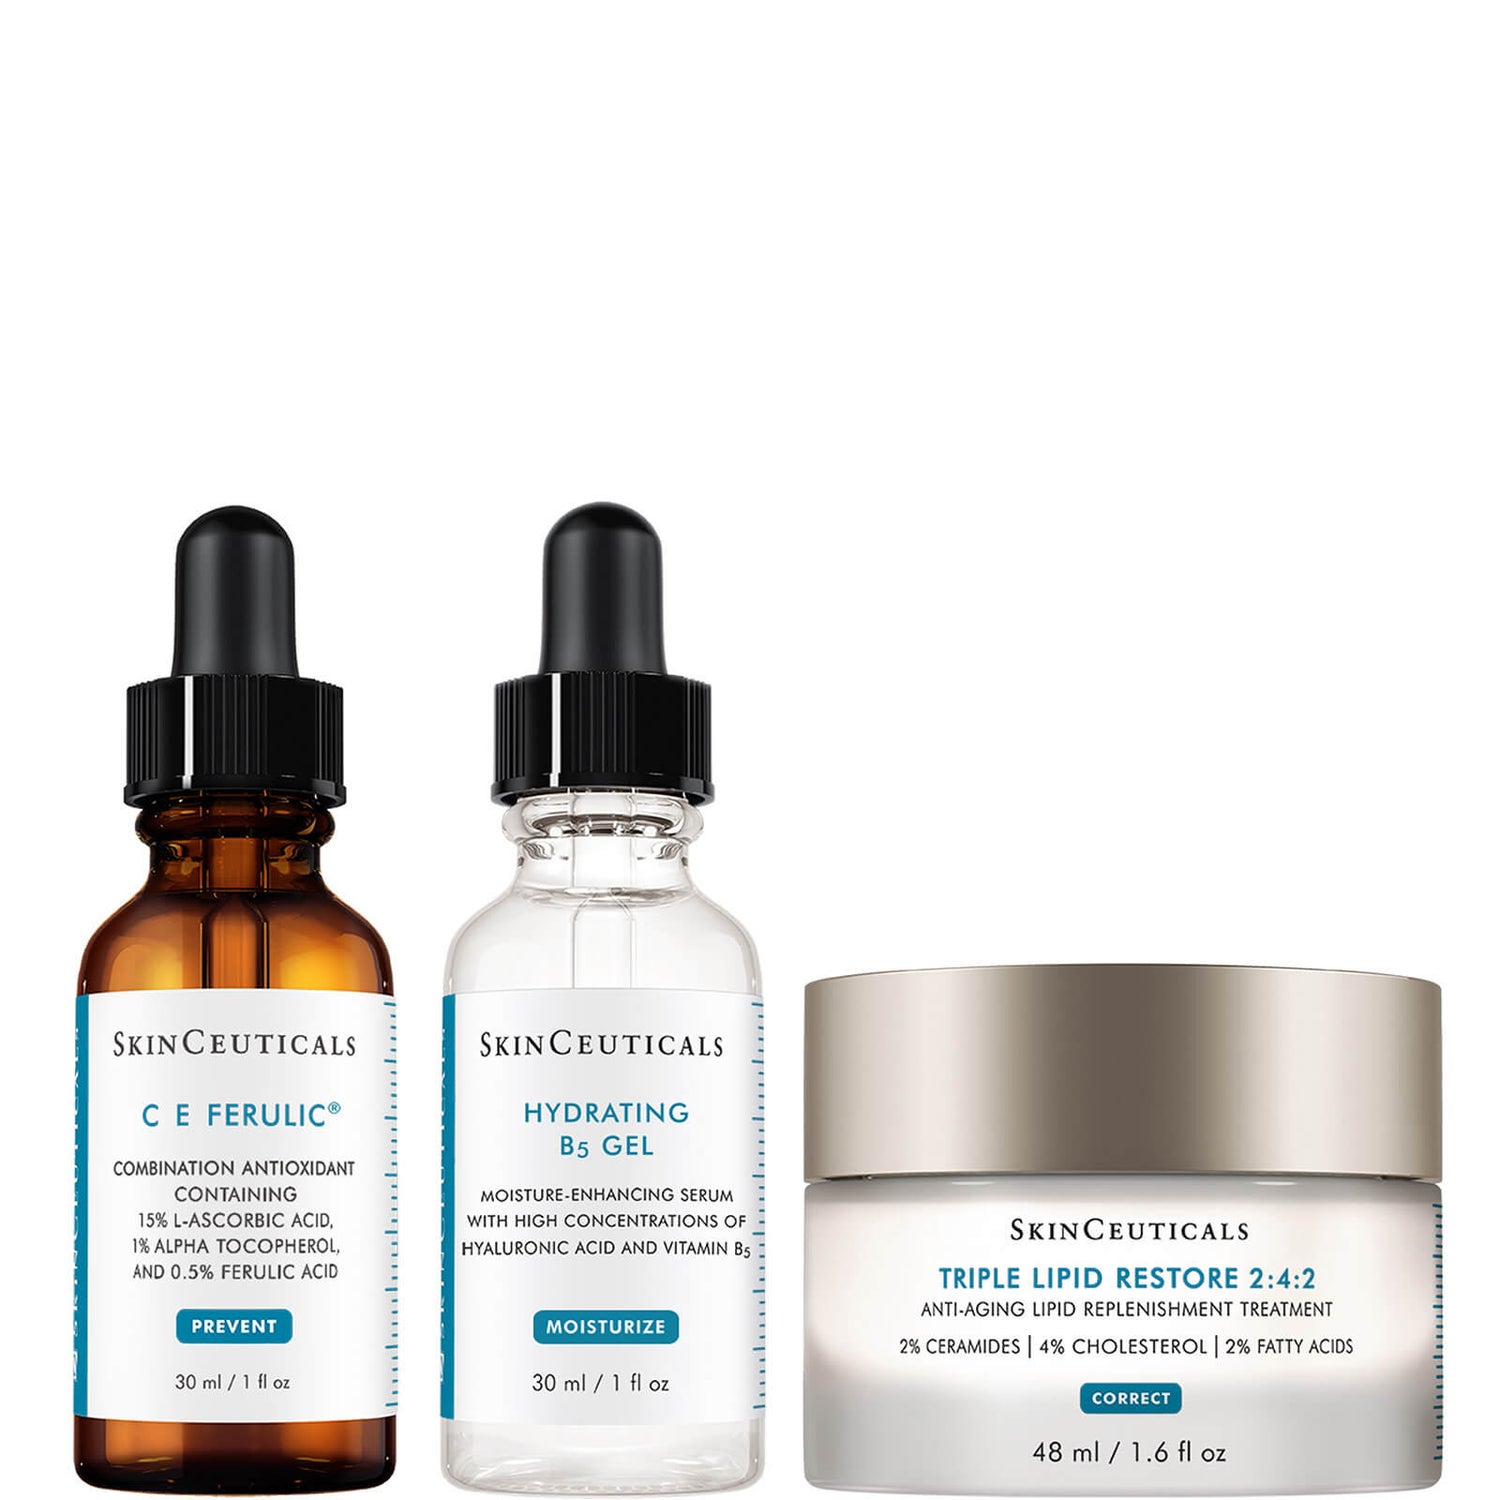 SkinCeuticals Anti-Aging Firming Set with C E Ferulic Vitamin C and Hyaluronic Acid